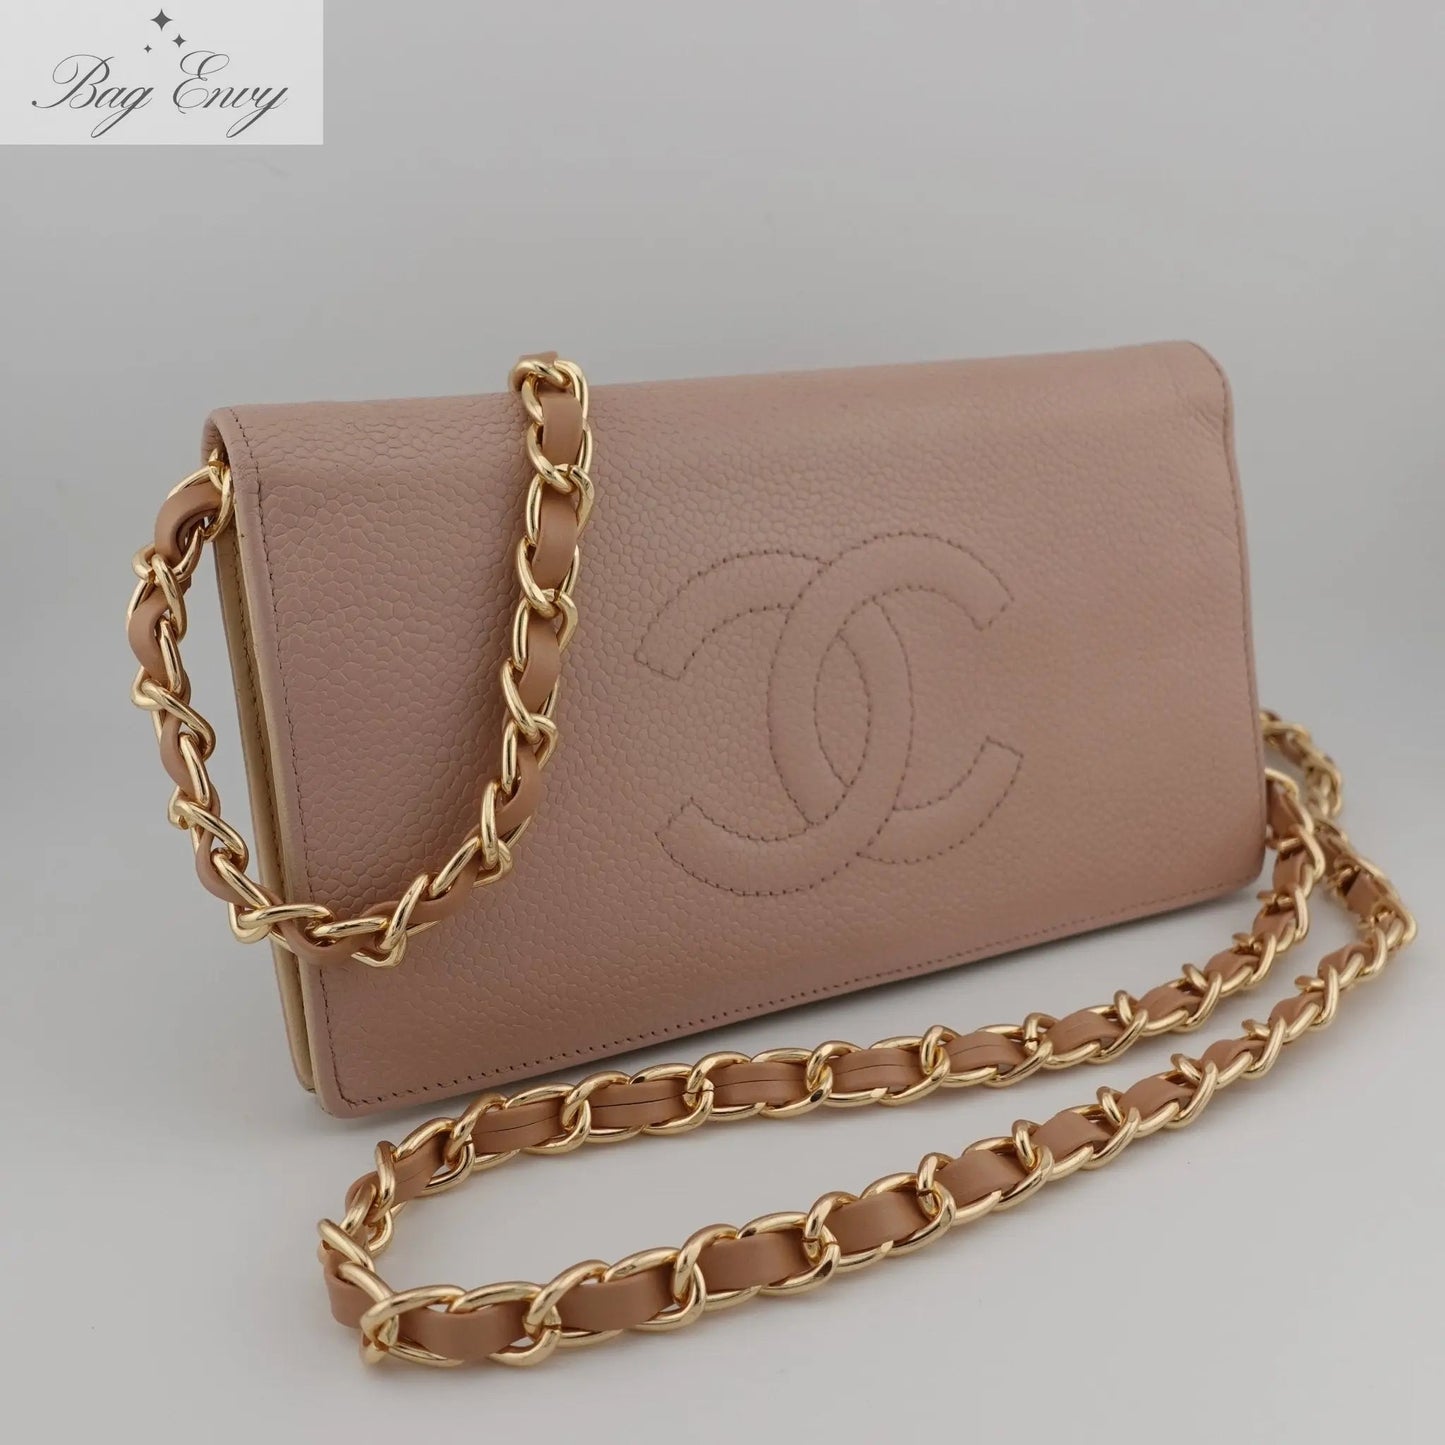 CHANEL Caviar Timeless Bifold Wallet on Chain - Bag Envy